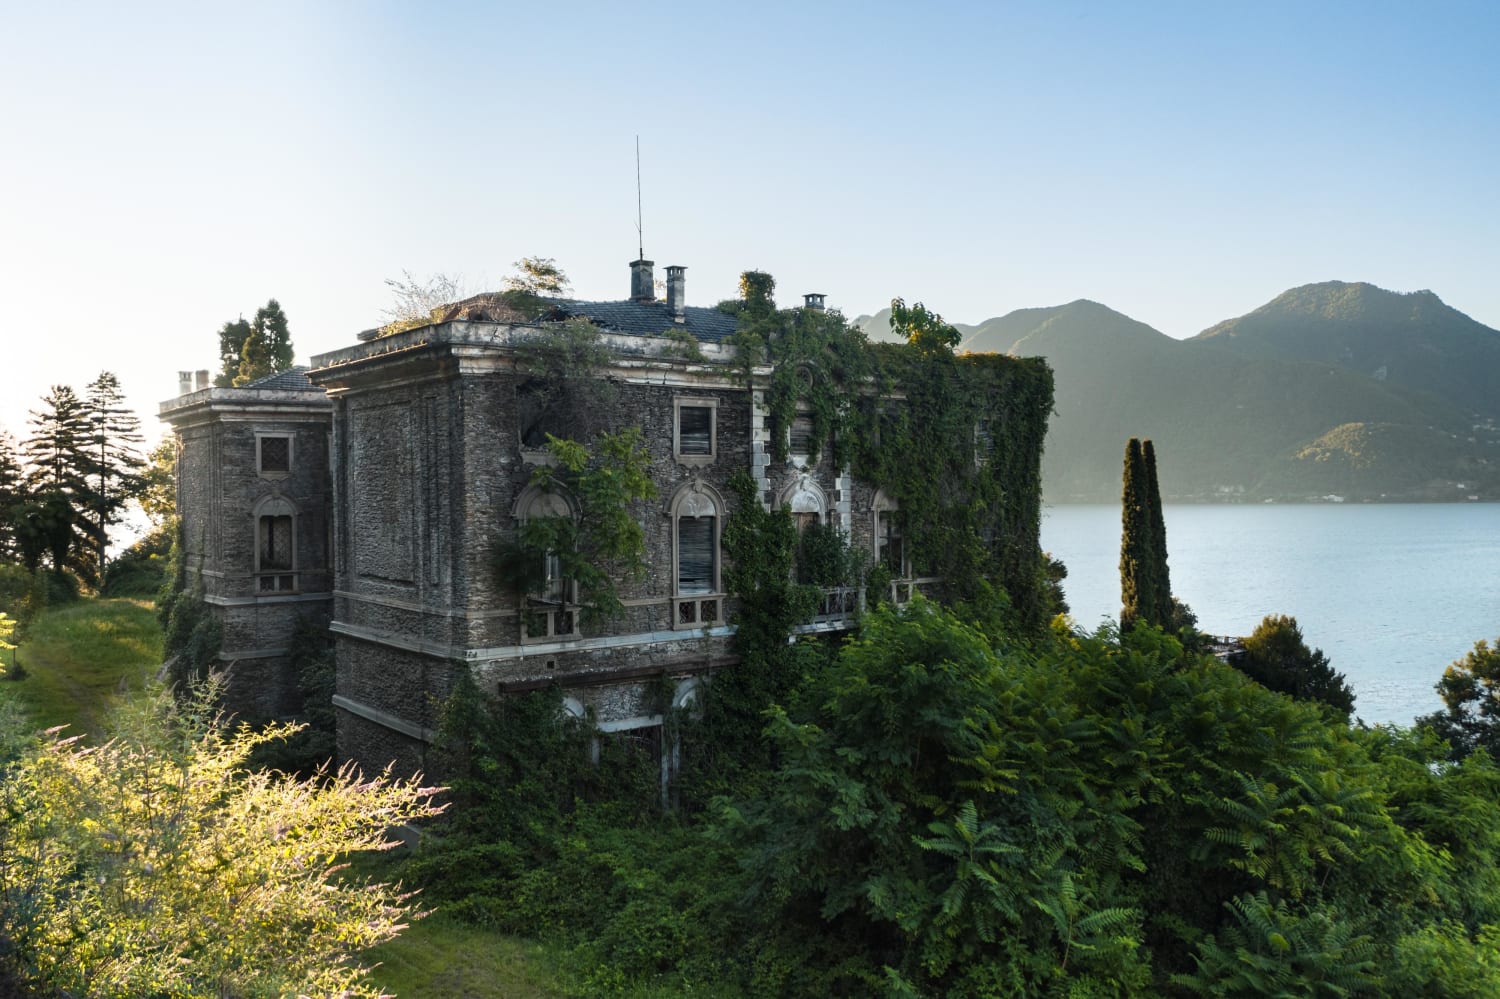 Lake view villa in Italy abandoned for over 60 years